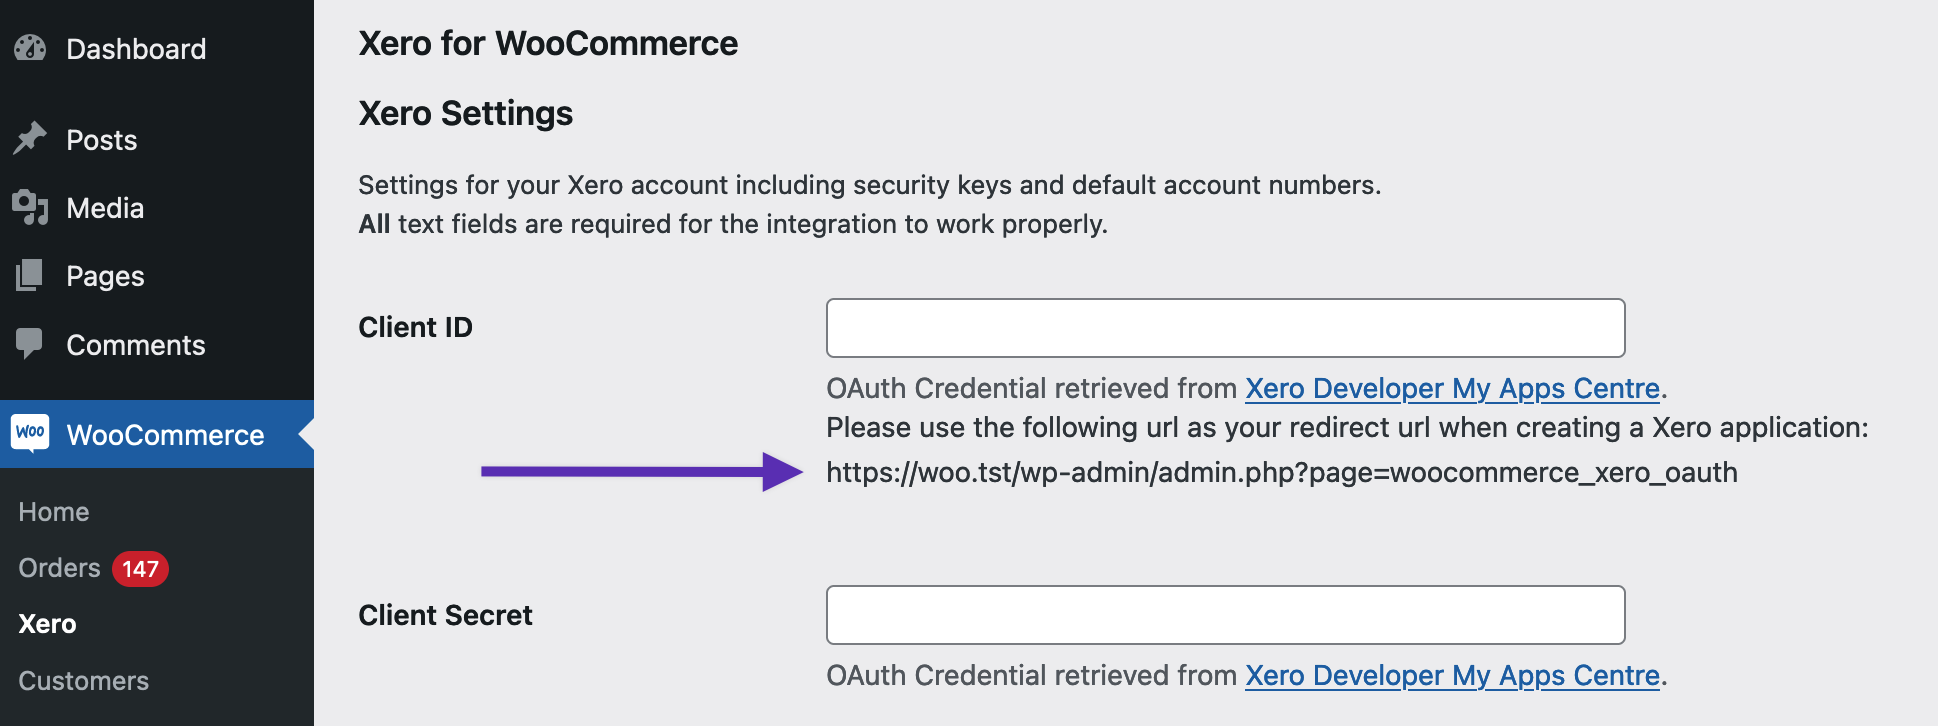 Redirect URI - can be copied from your site's WooCommerce > Xero settings